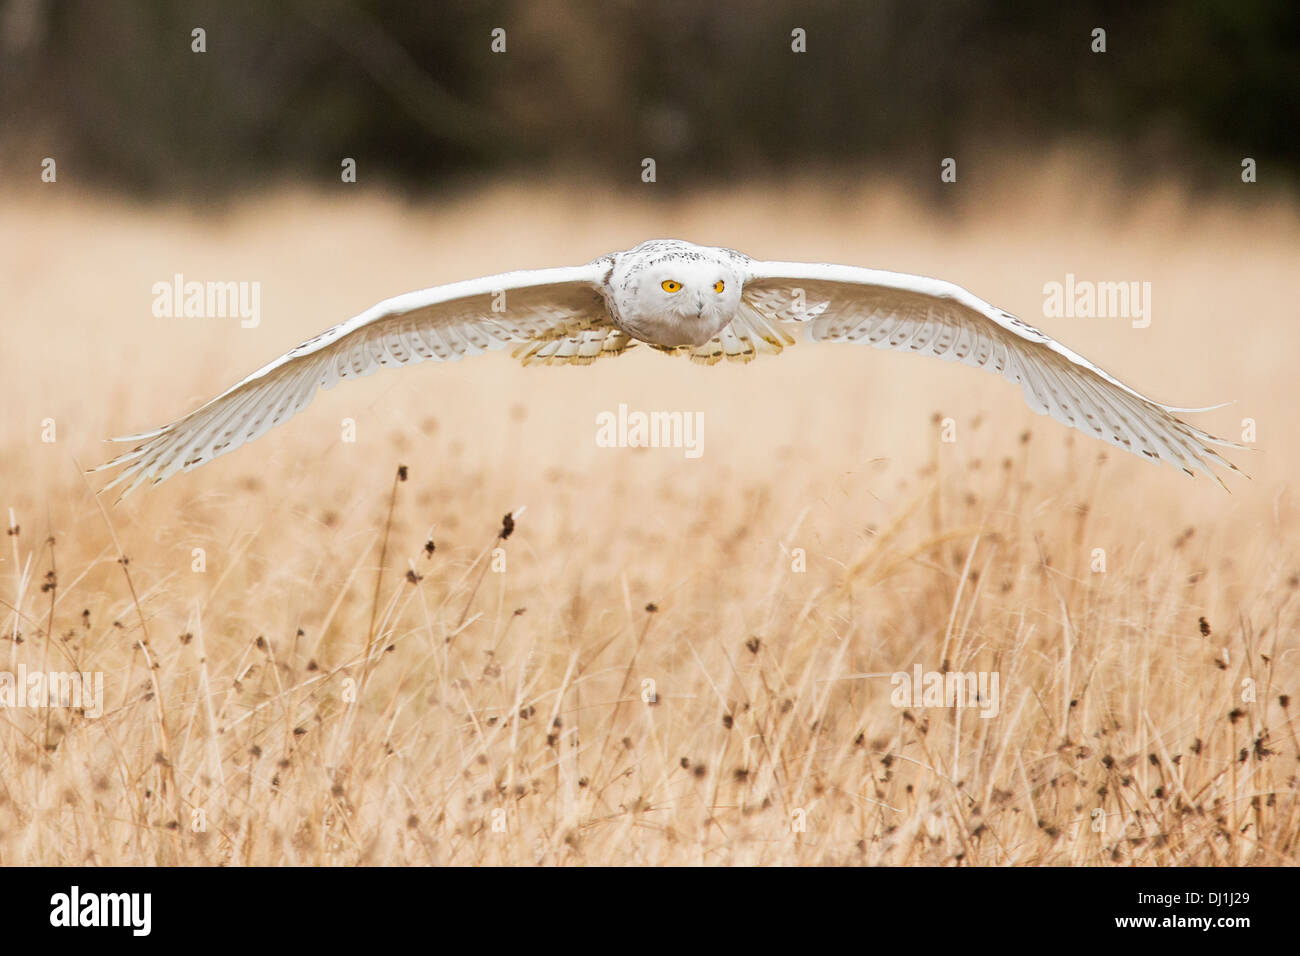 Snowy owl (Bubo scandiacus) in flight over long grass Stock Photo